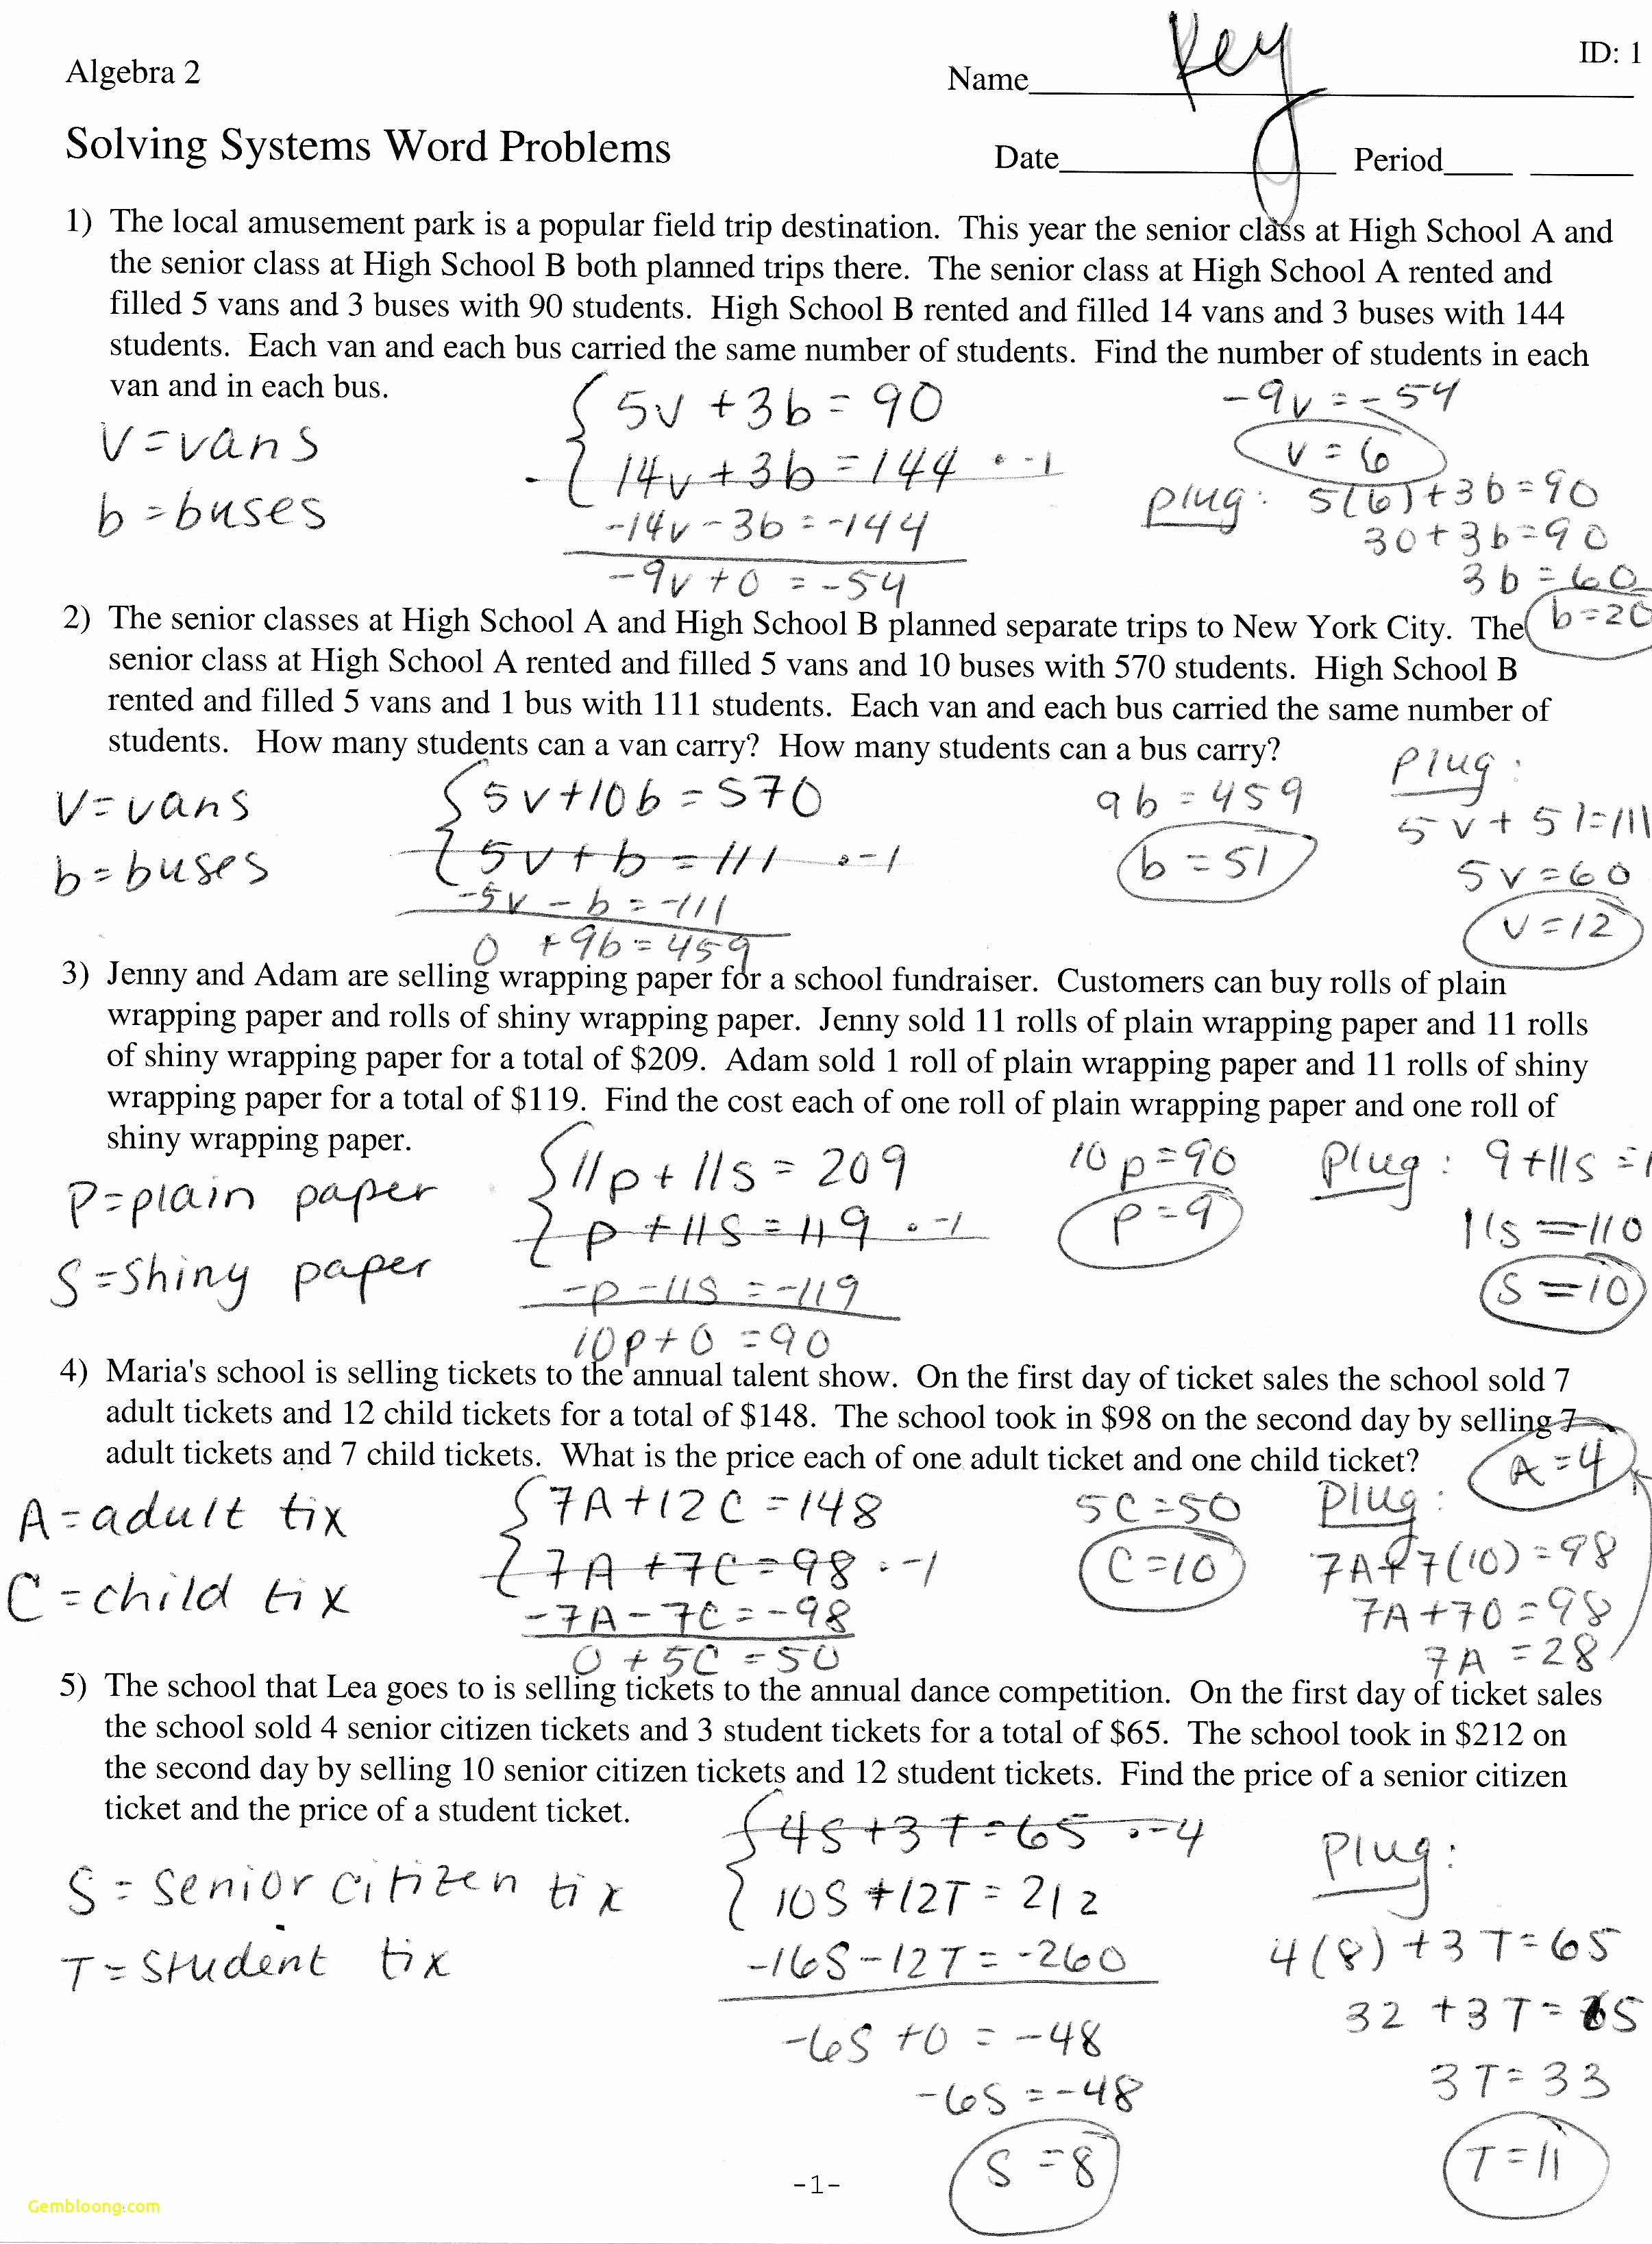 Multiply Rational Expressions Worksheet Luxury Multiplying and Dividing Rational Expressions Worksheet